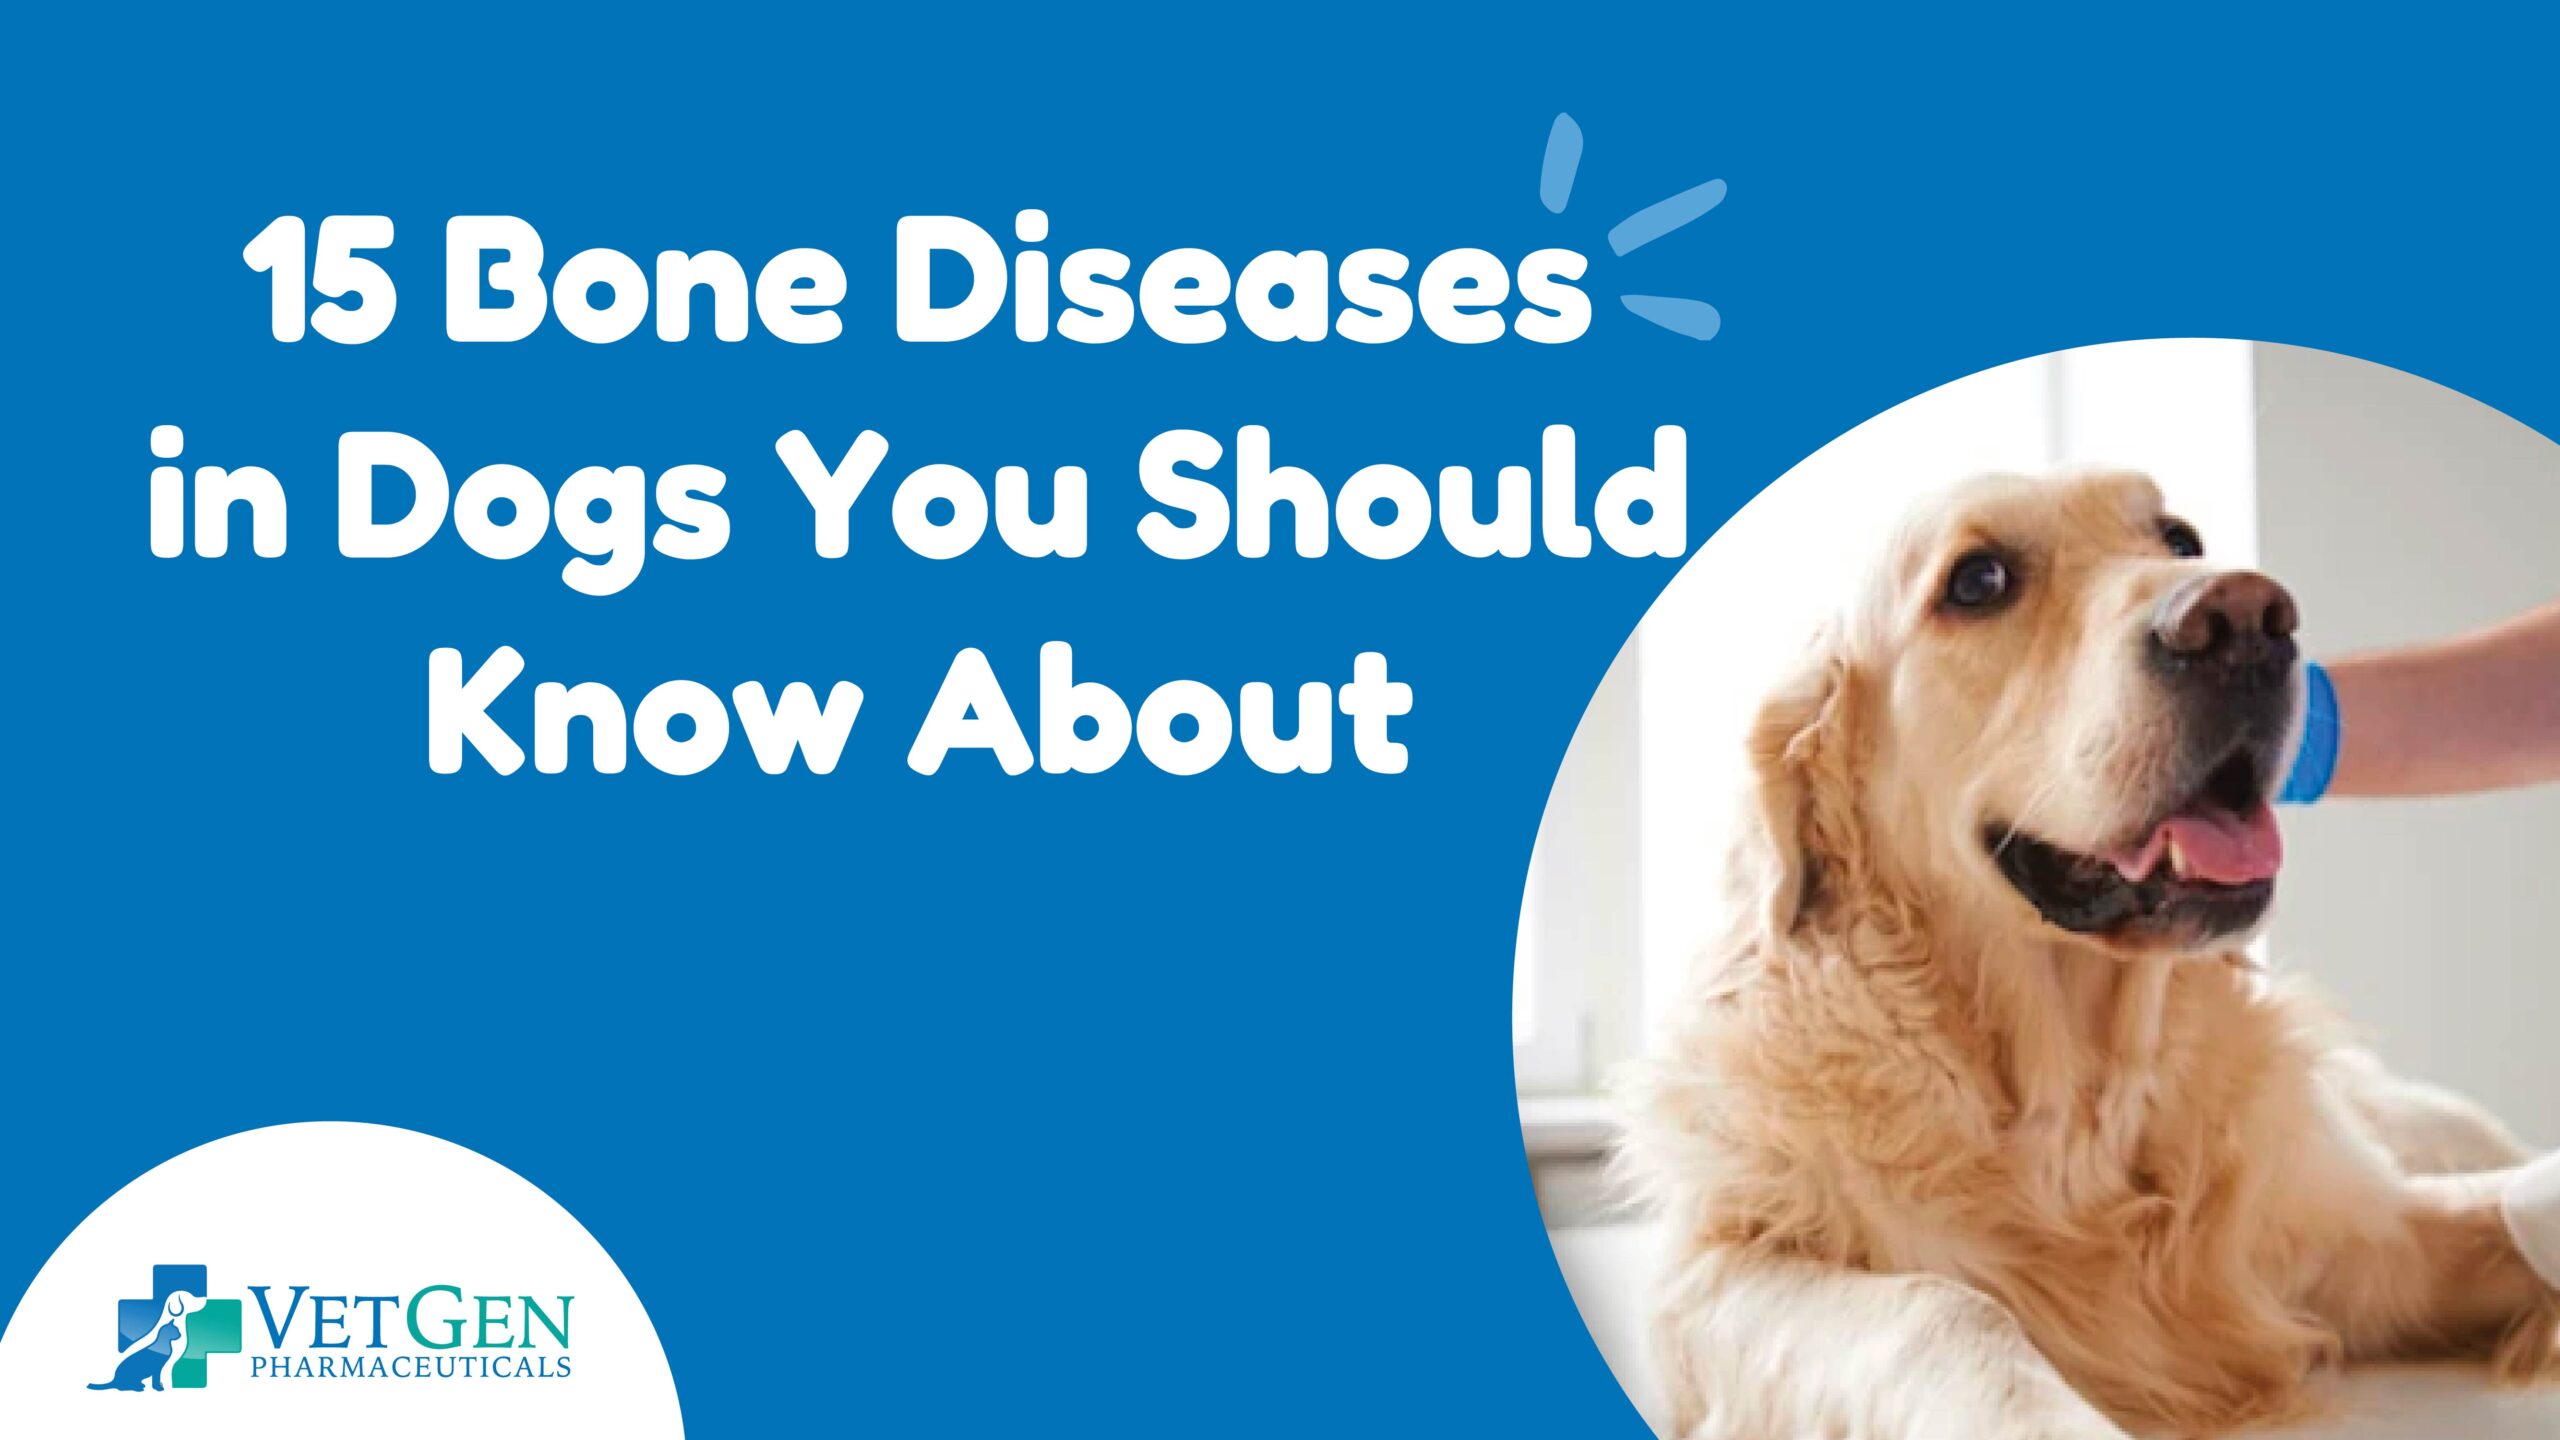 15 Bone Diseases in Dogs You Should Know About